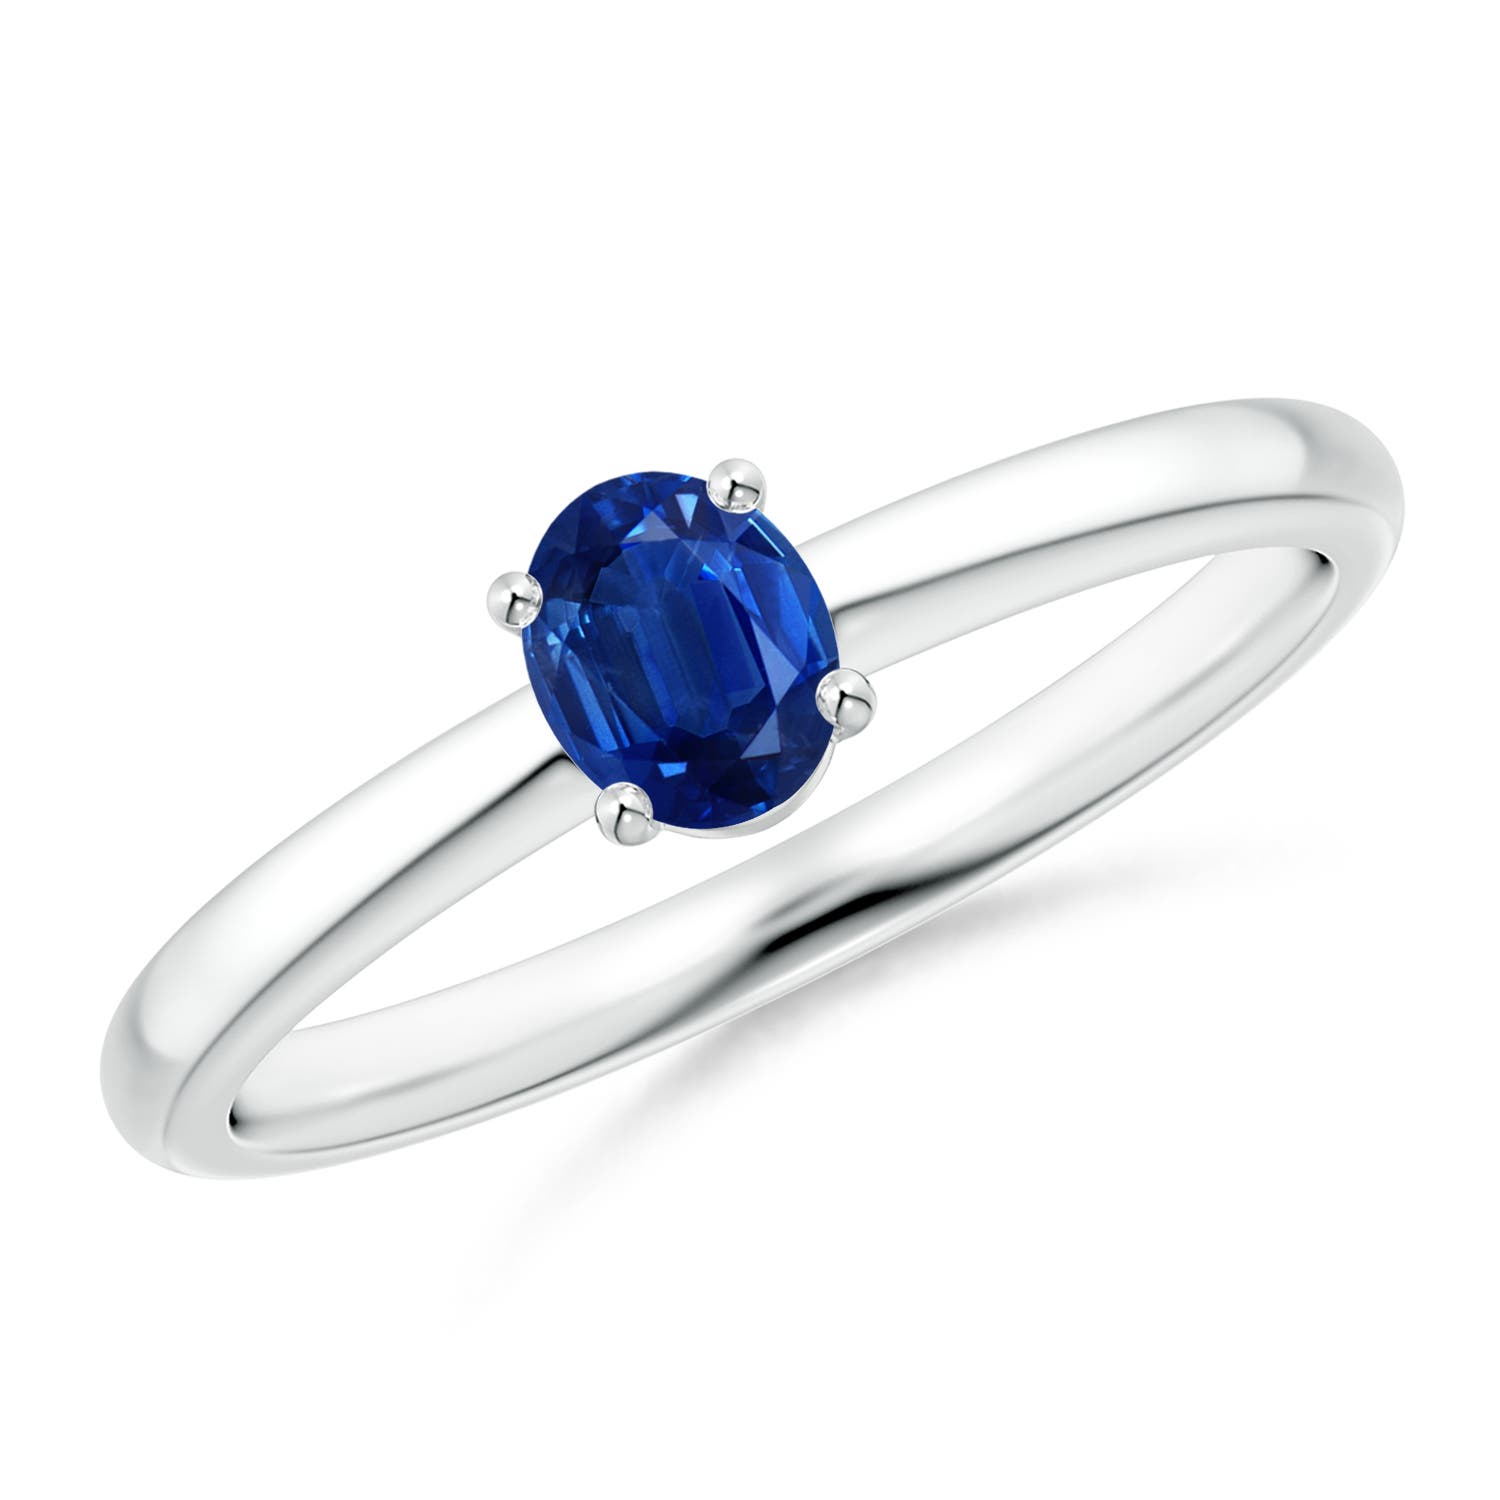 AAA - Blue Sapphire / 0.4 CT / 14 KT White Gold